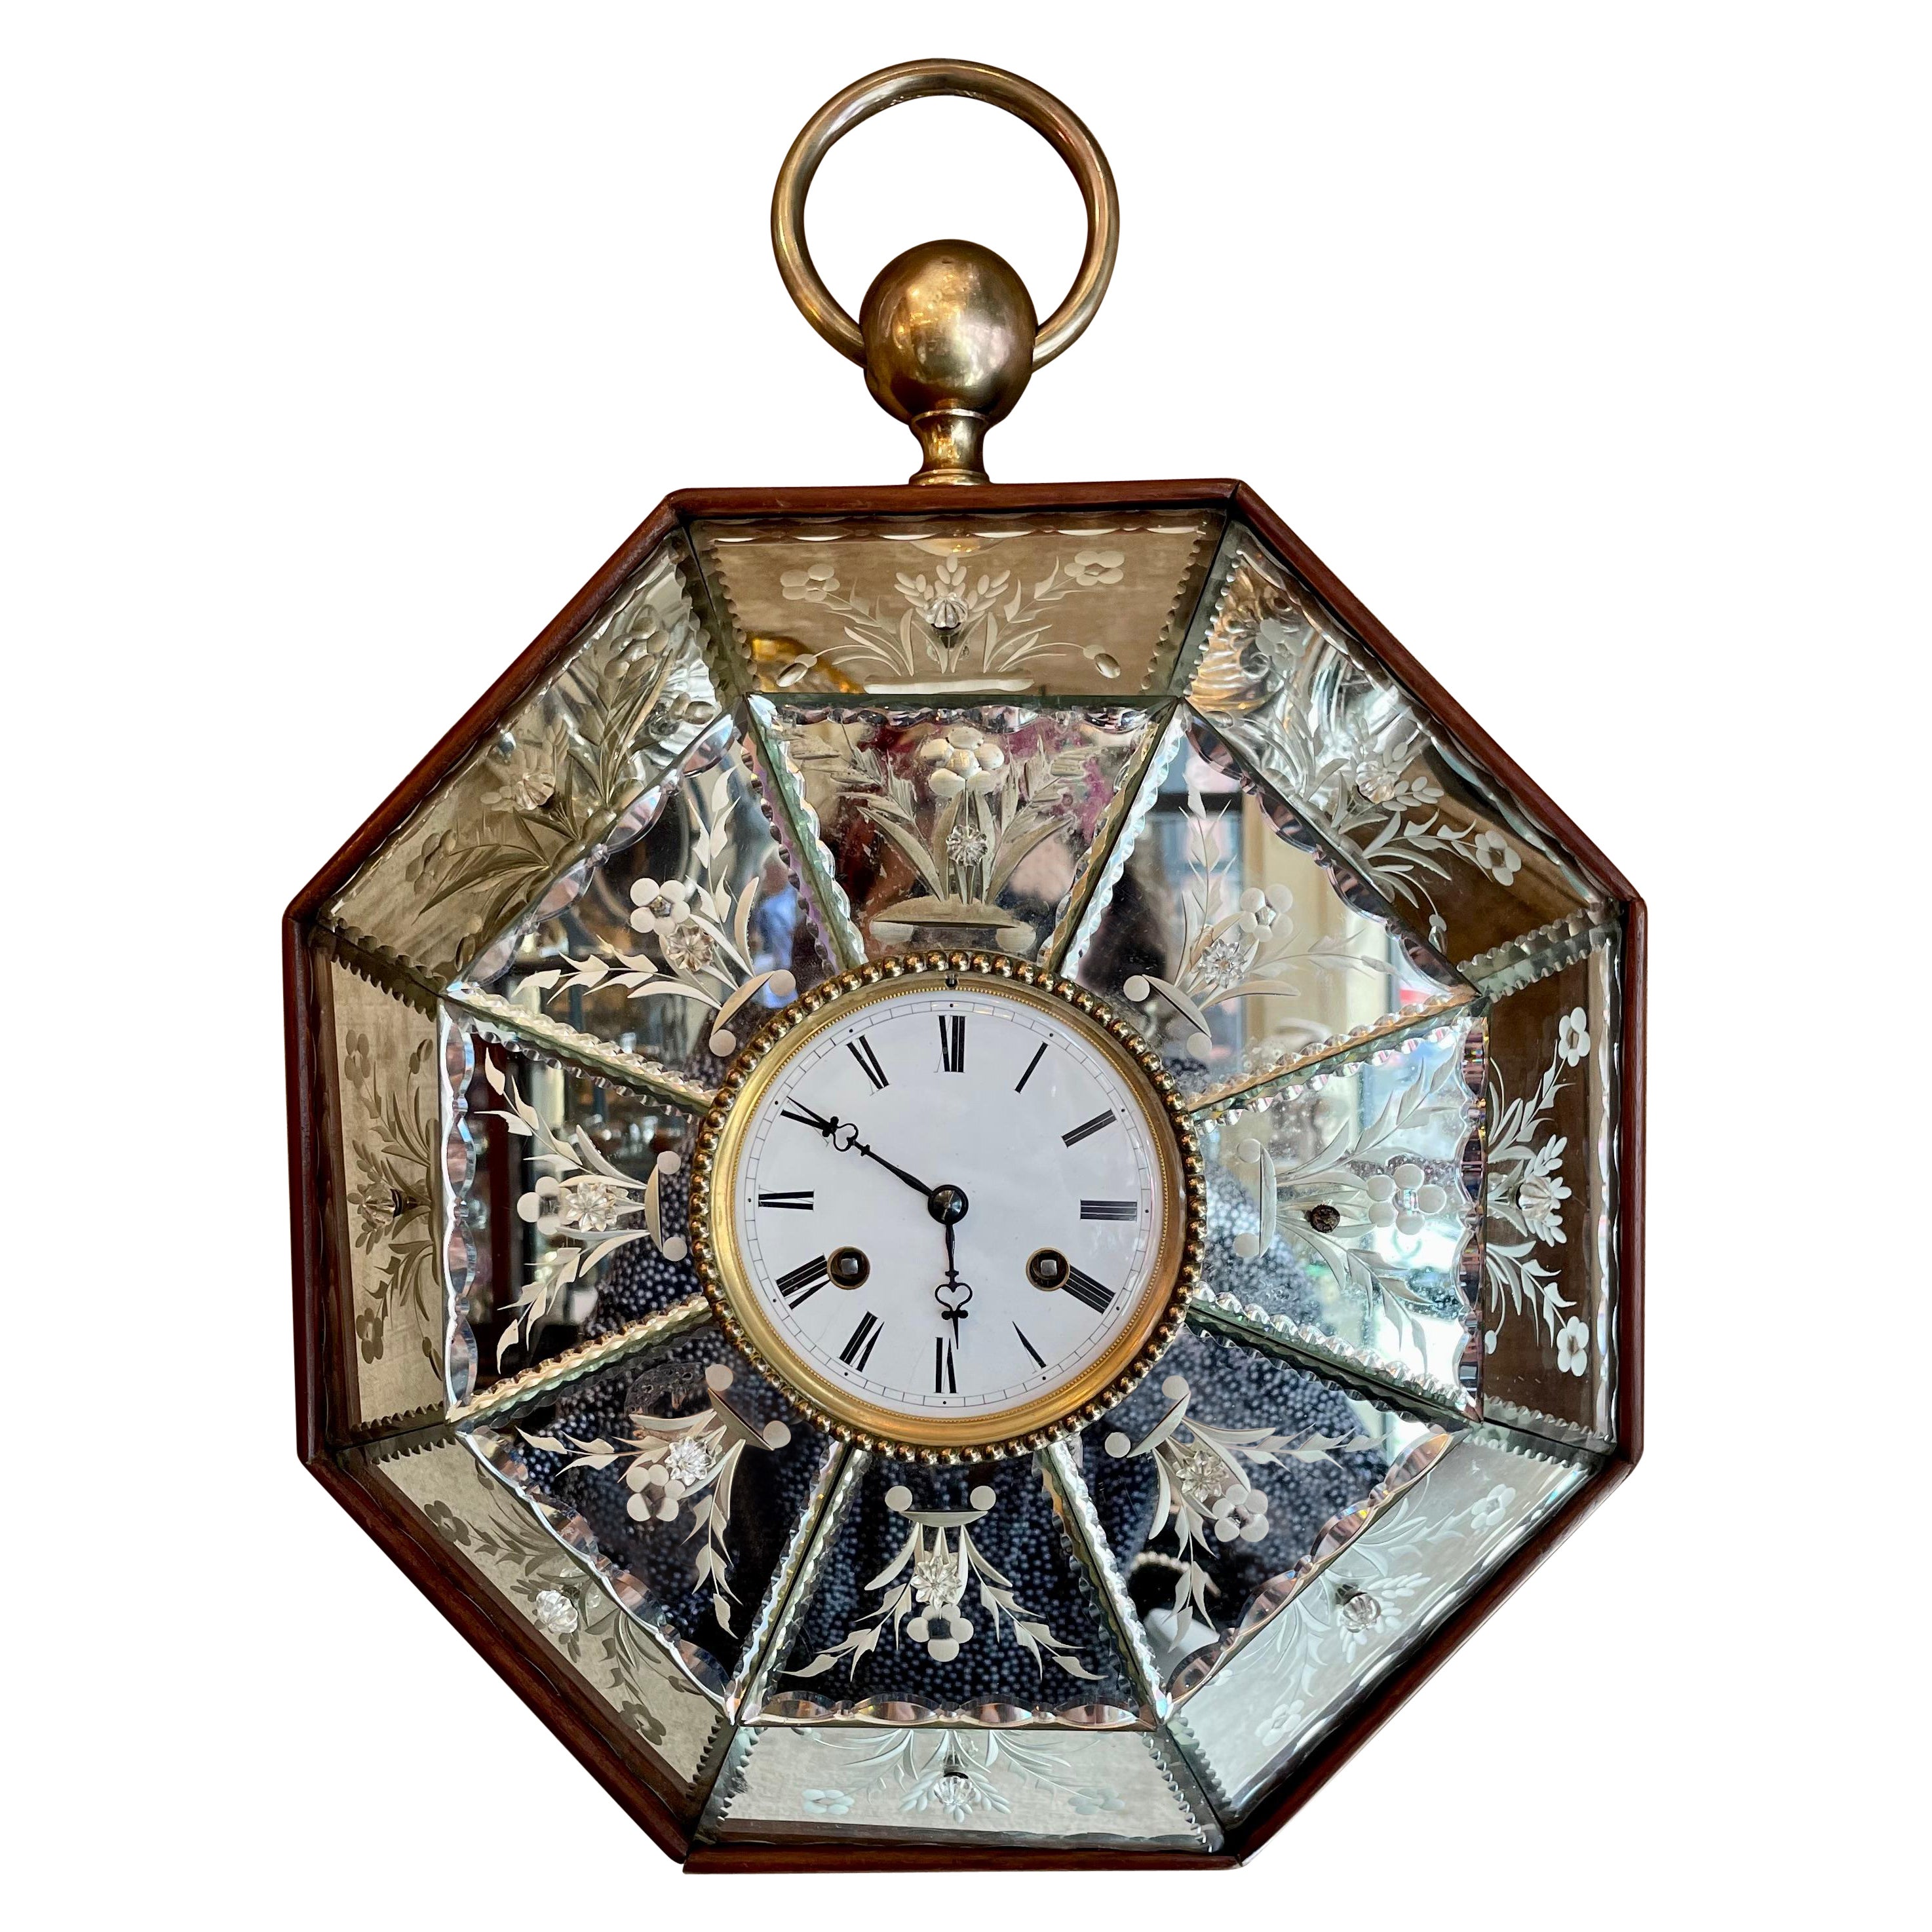 Antique Mirrored & Diamond-Etched Wall Clock, circa 1900-1910 For Sale